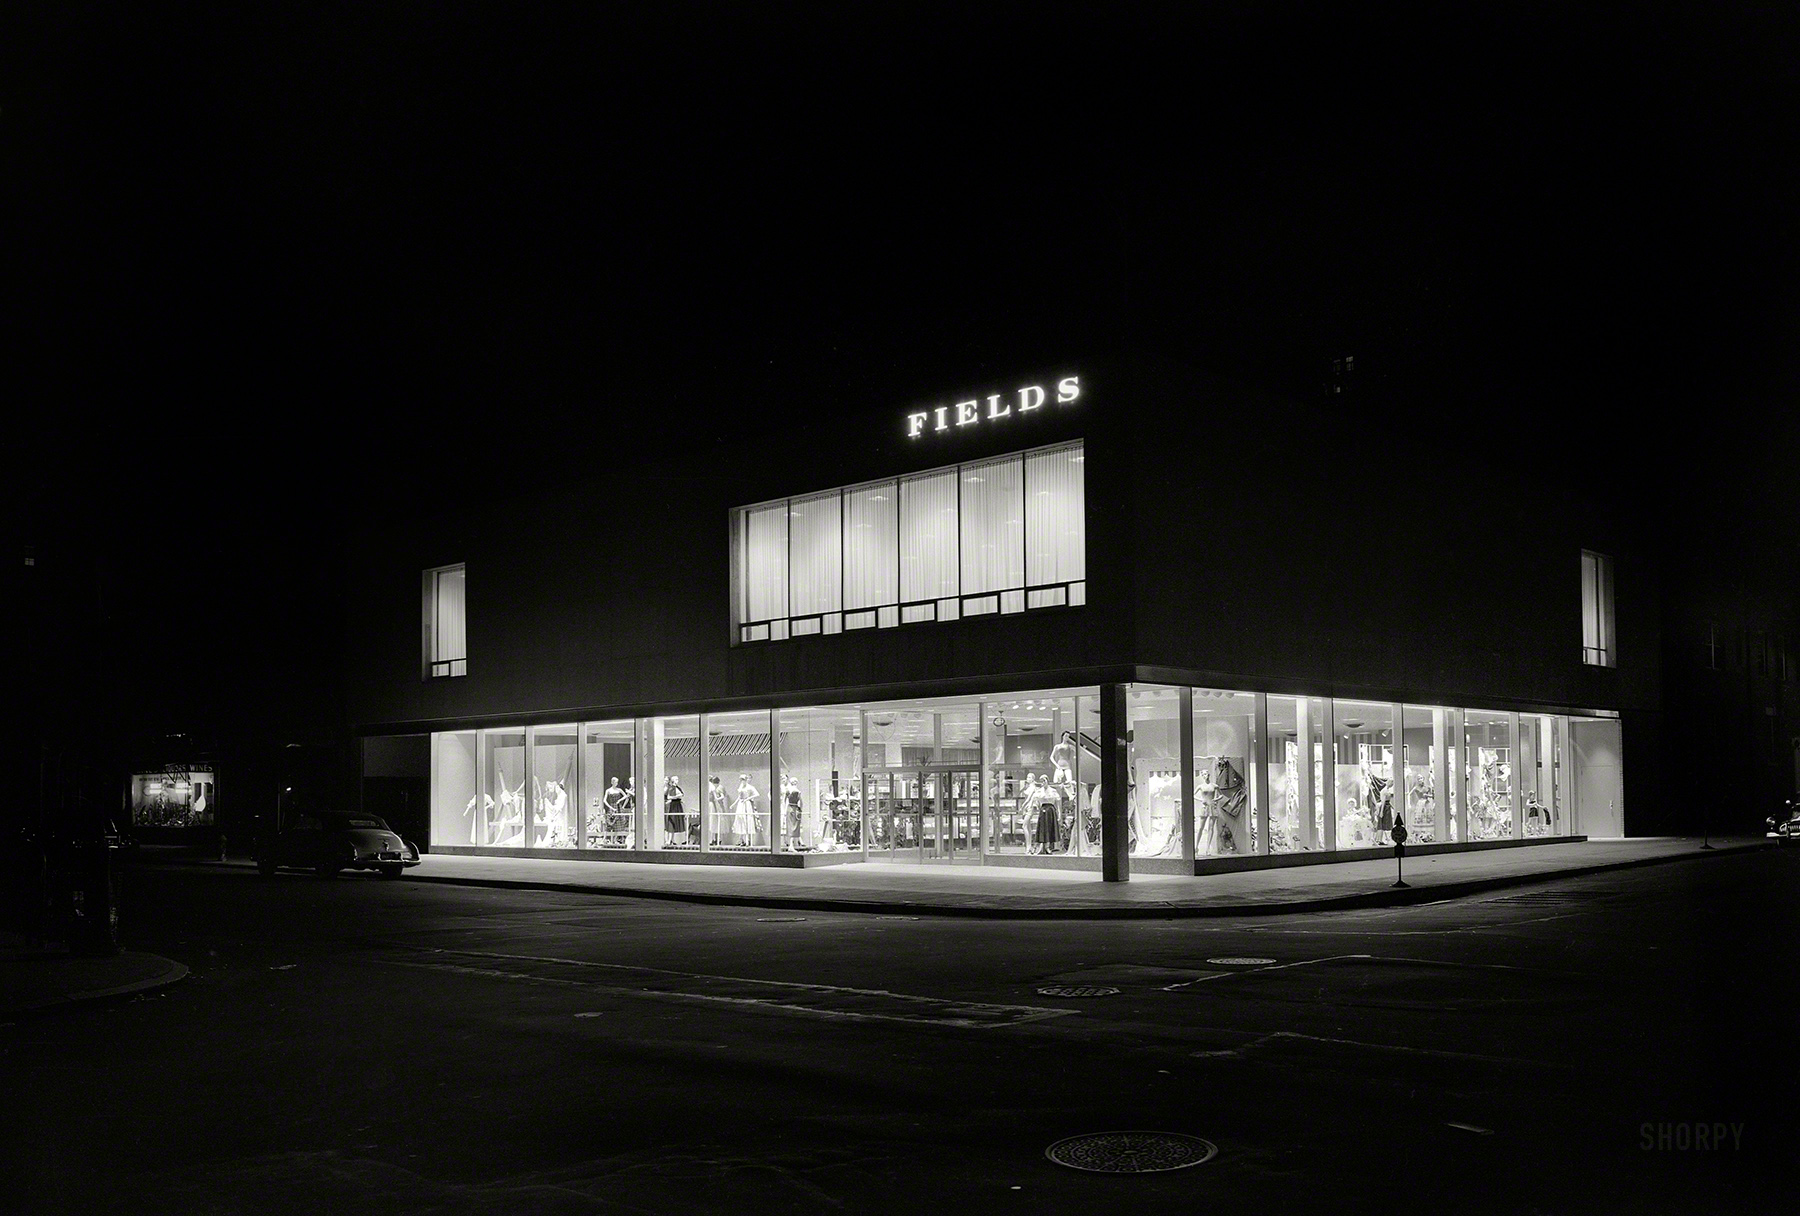 June 8, 1950. "Fields department store, business at 37th Avenue and 82nd Street, Jackson Heights, Queens, New York. Exterior, by night." (Daytime view here.) 5x7 inch acetate negative by Gottscho-Schleisner. View full size.